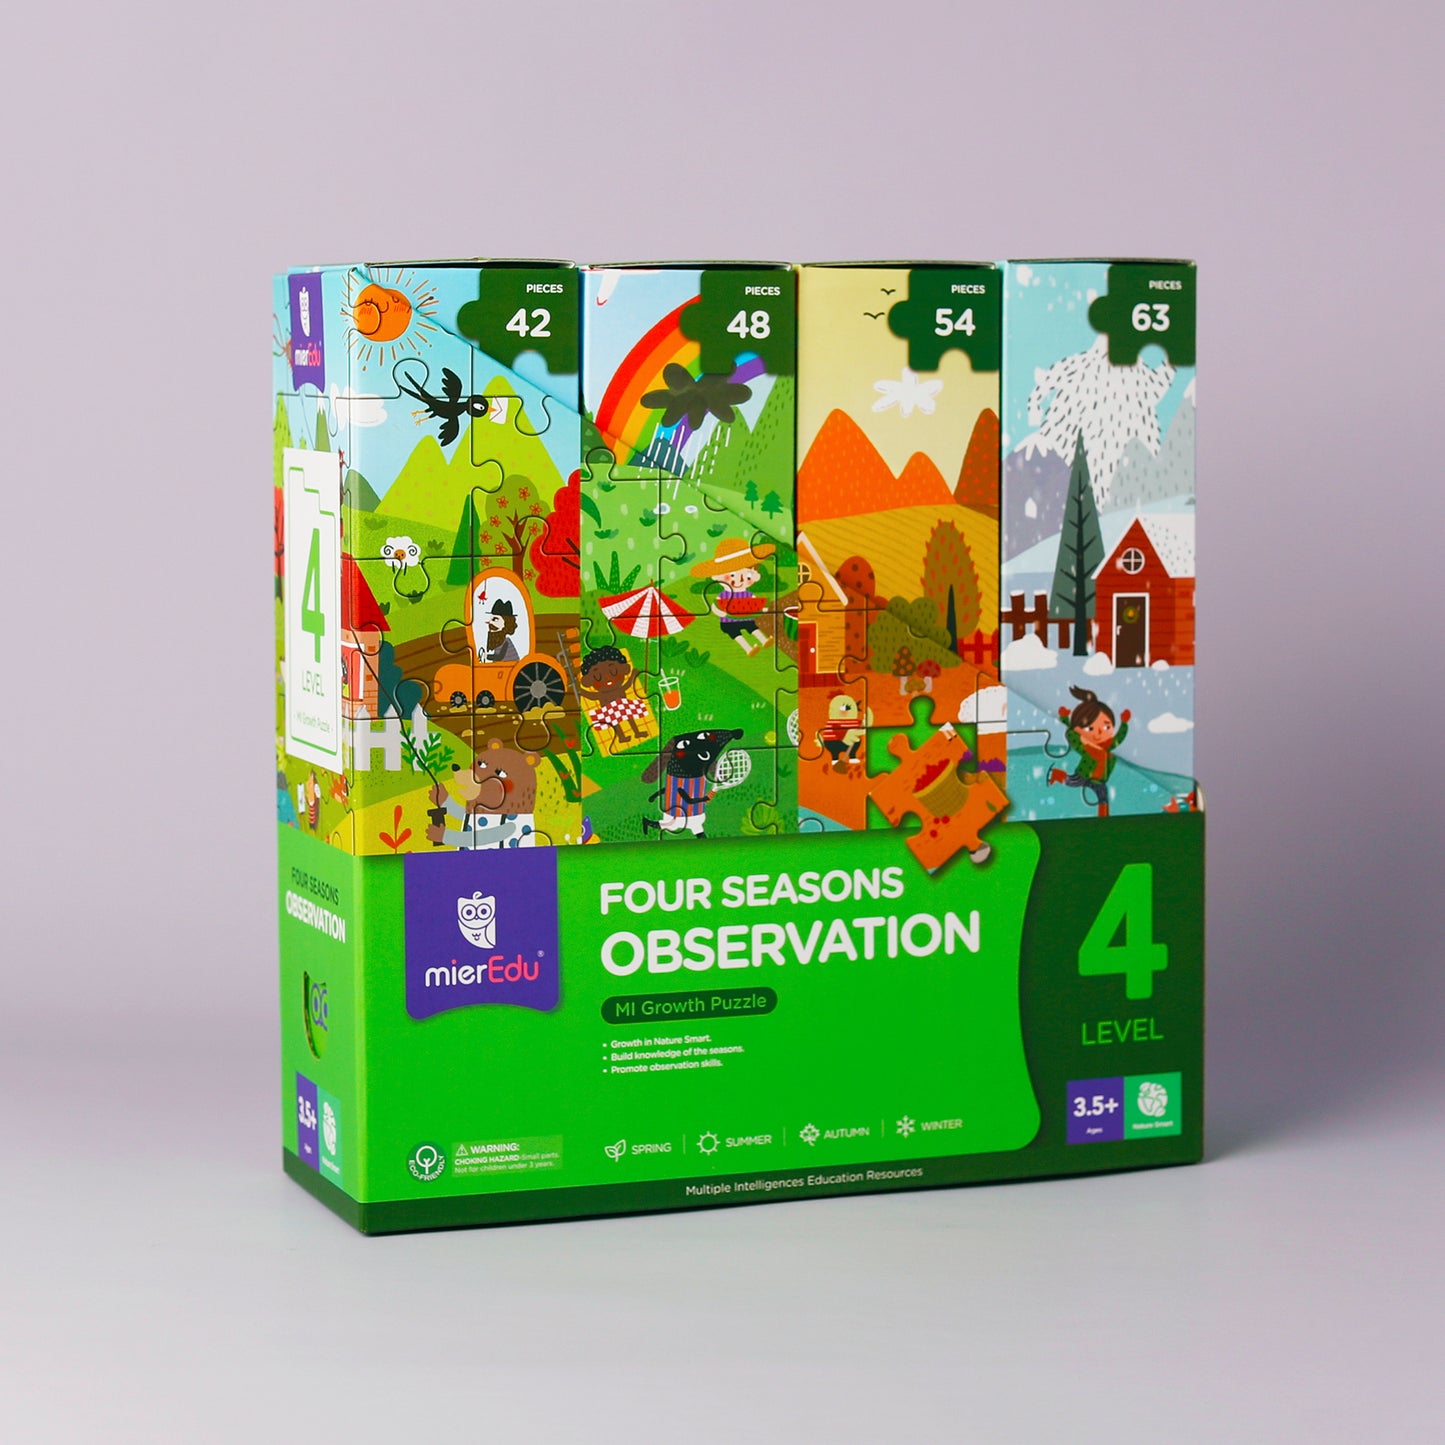 MI Growth Puzzles Level 4 - Four Seasons Observation